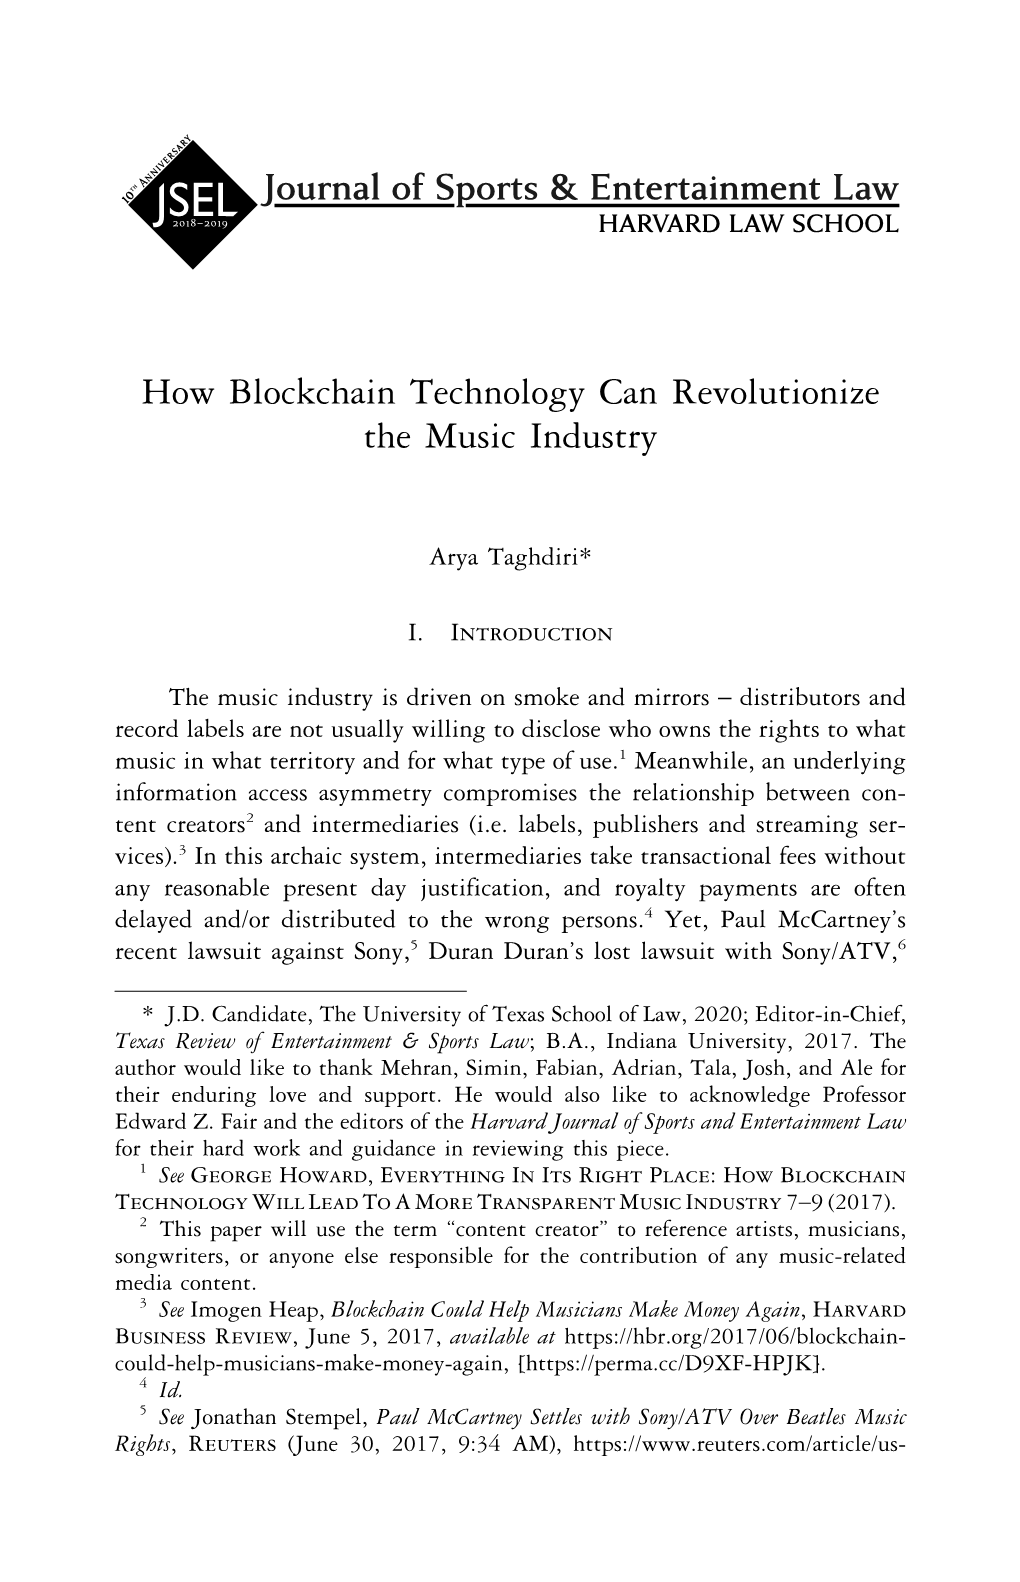 How Blockchain Technology Can Revolutionize the Music Industry